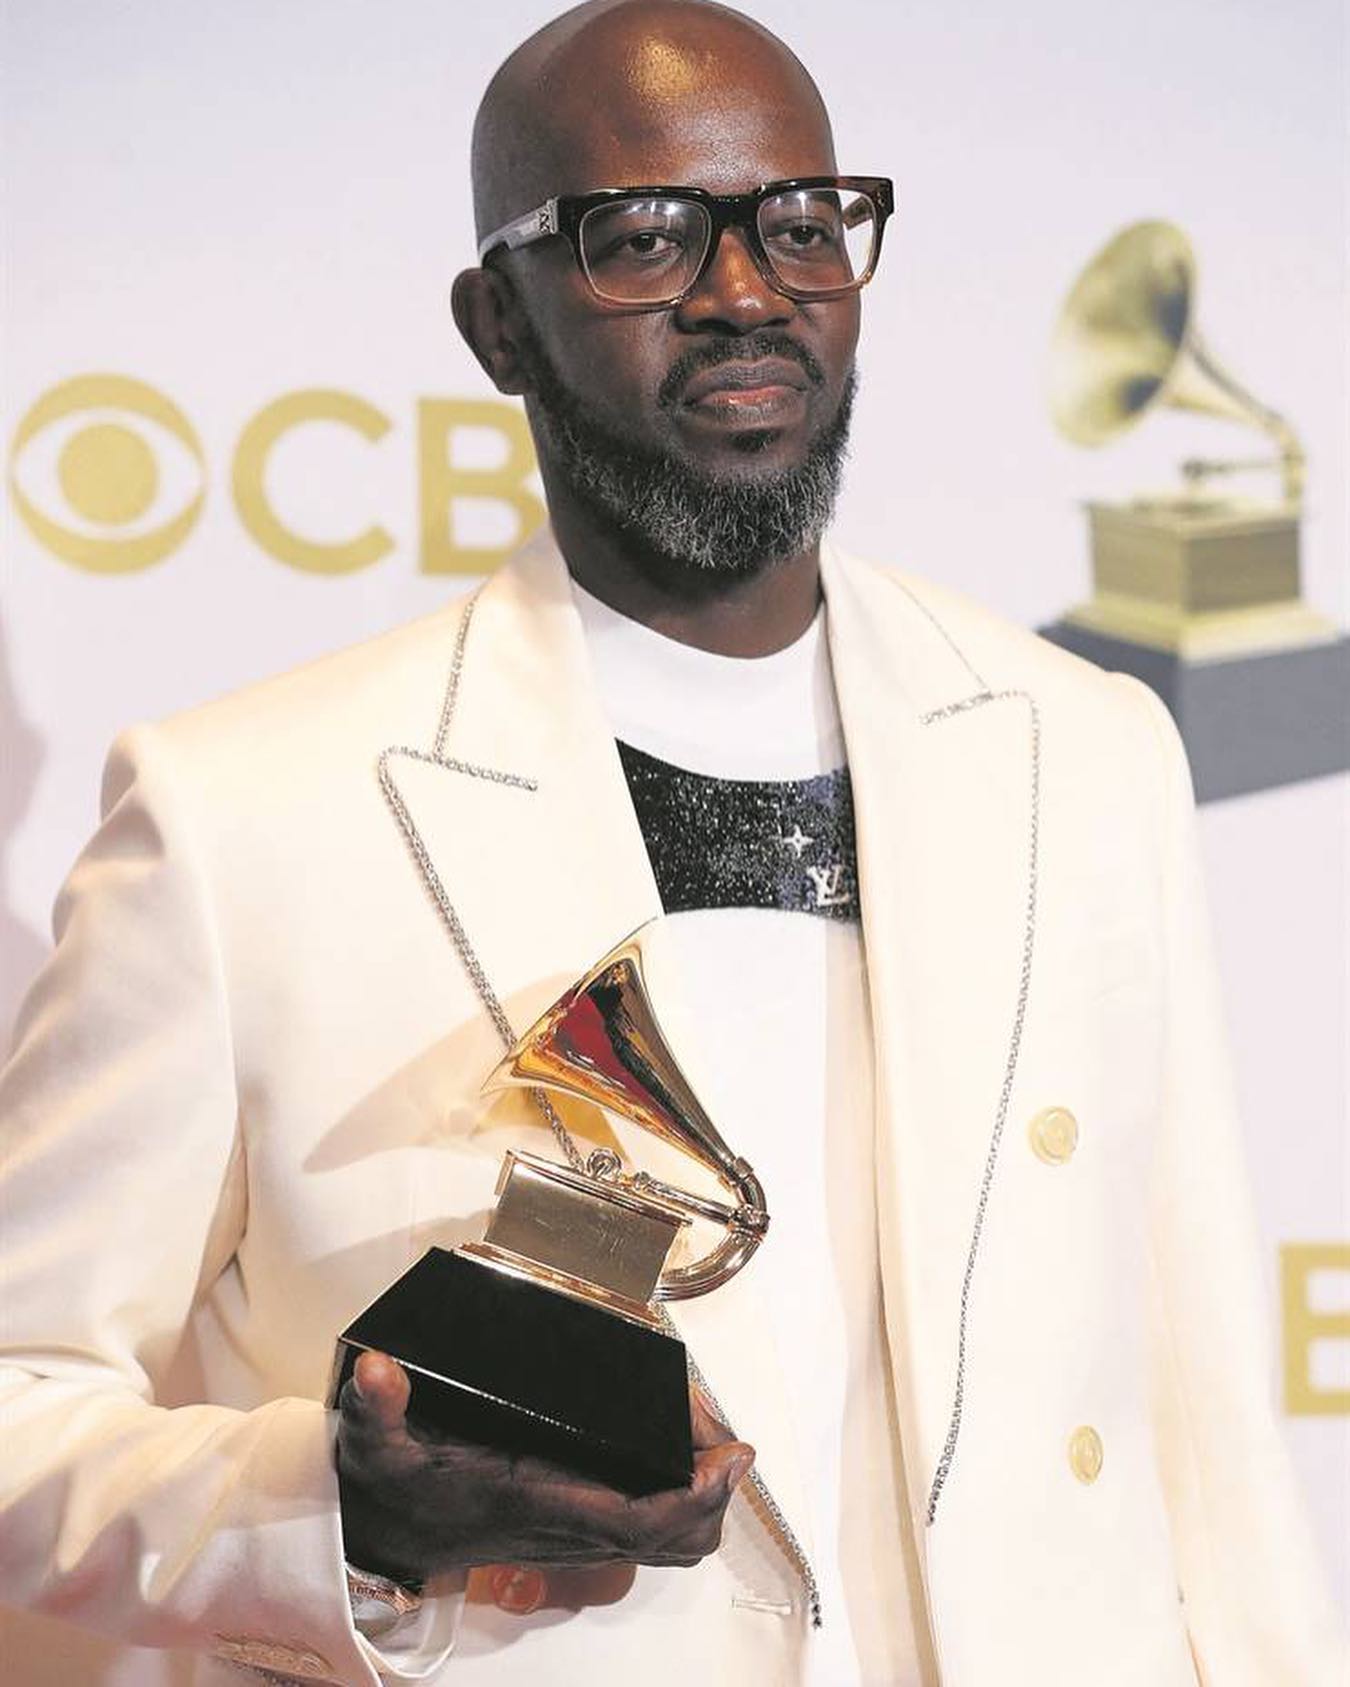 Video Of Oskido Trying On DJ Black Coffee’s “Grammy Jacket” Leaves Mzansi In Stitches